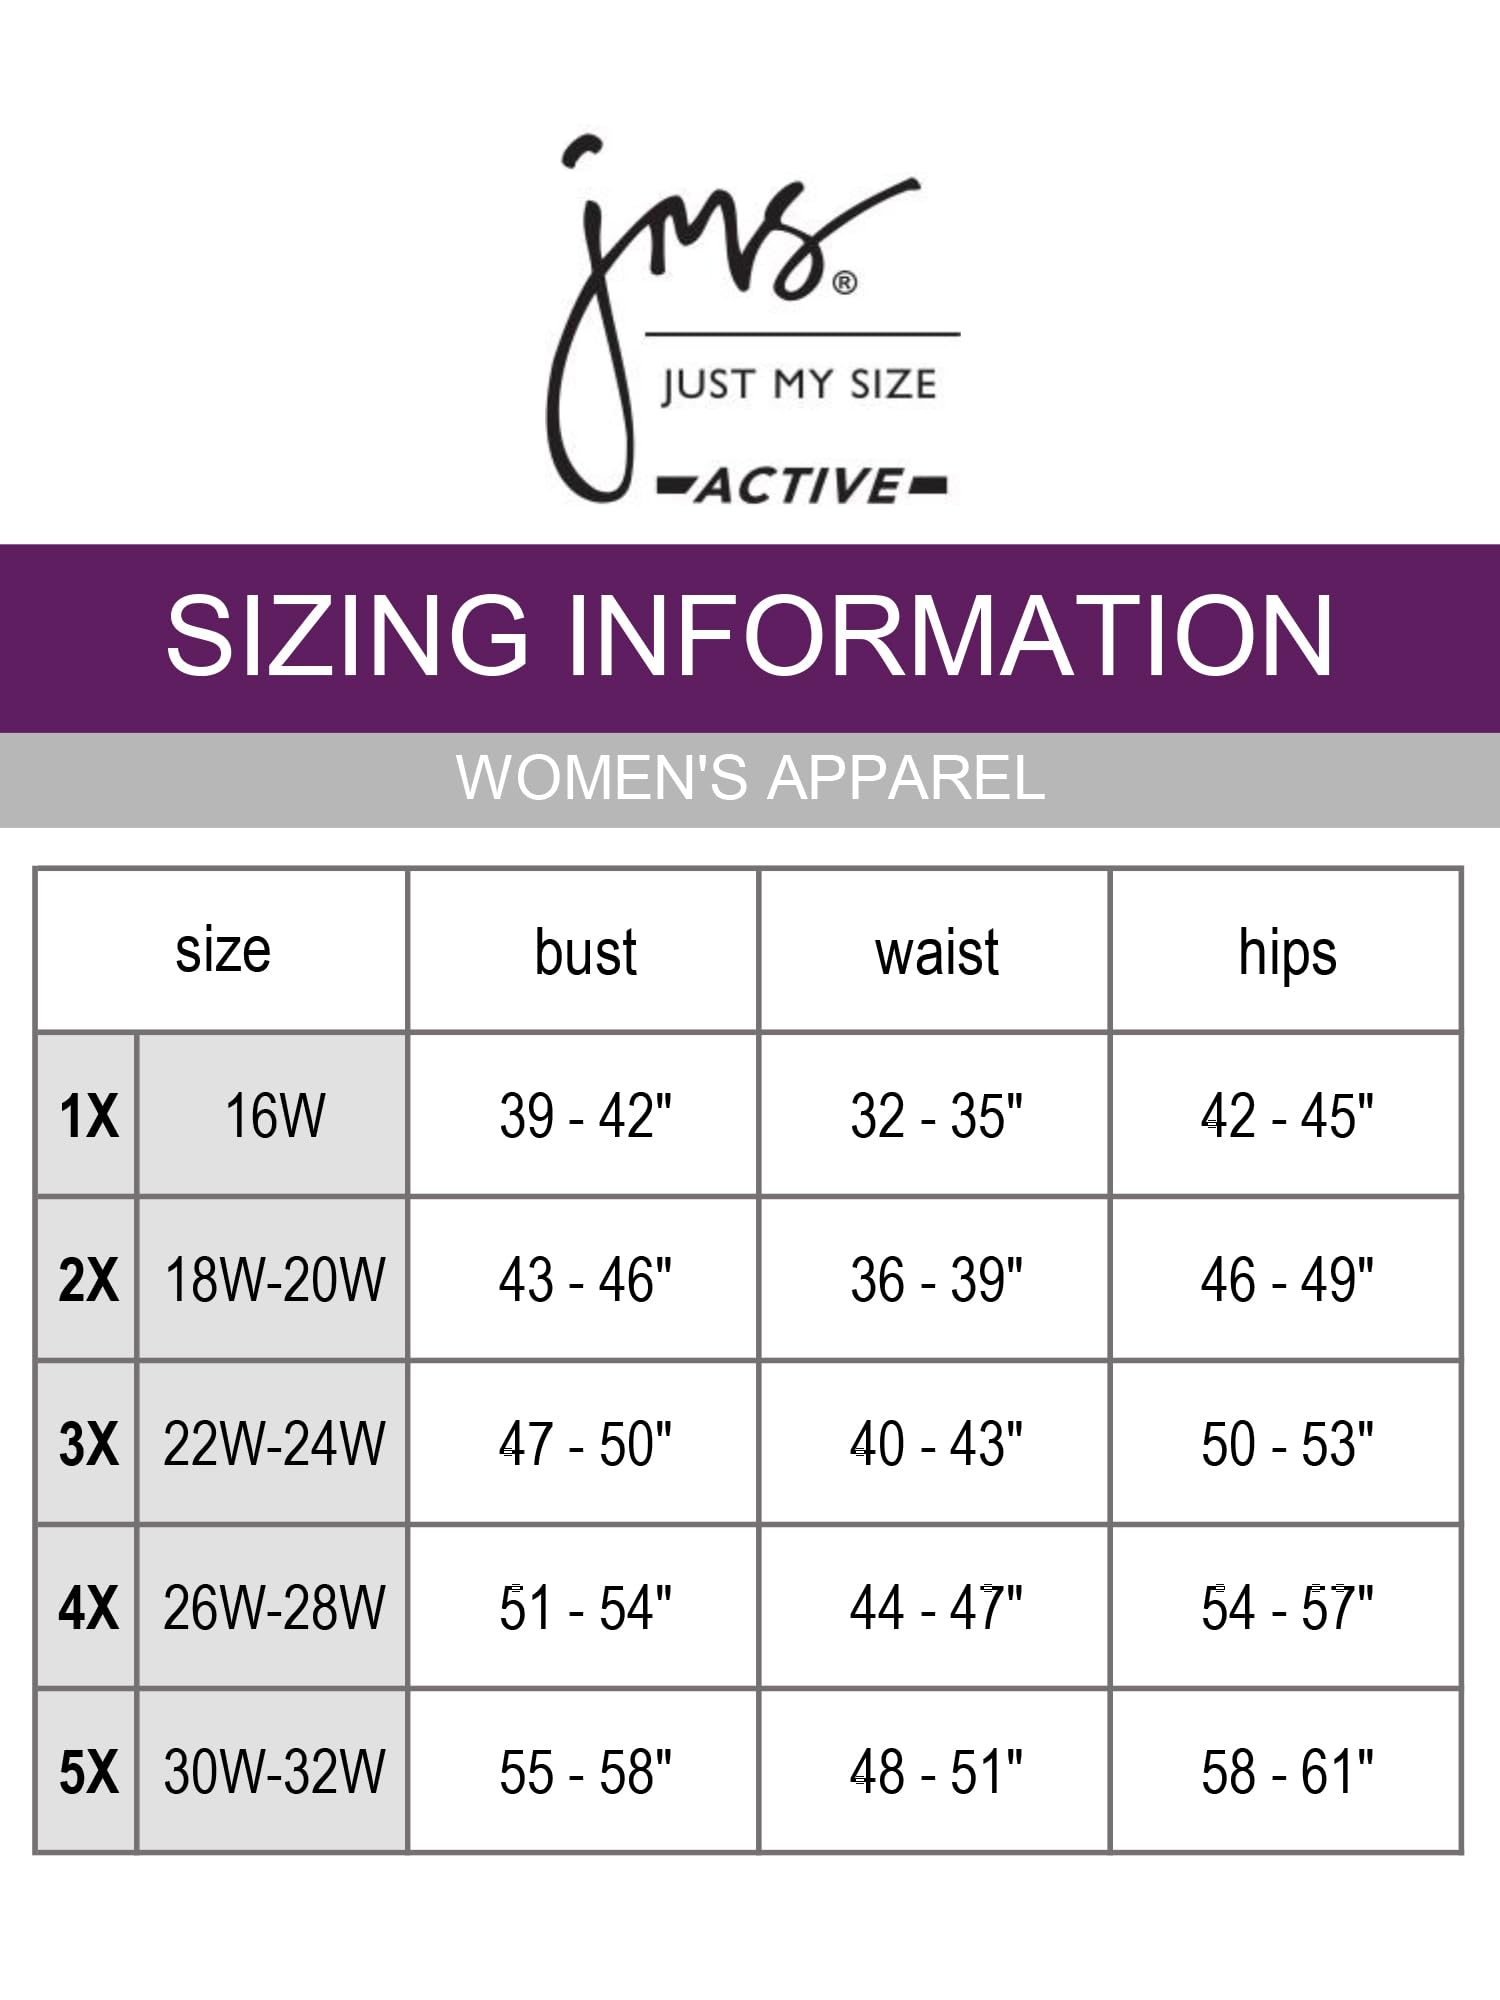 Just My Size Women's Plus Size Cotton Jersey Shorts, Pull-on Gym Shorts, 7